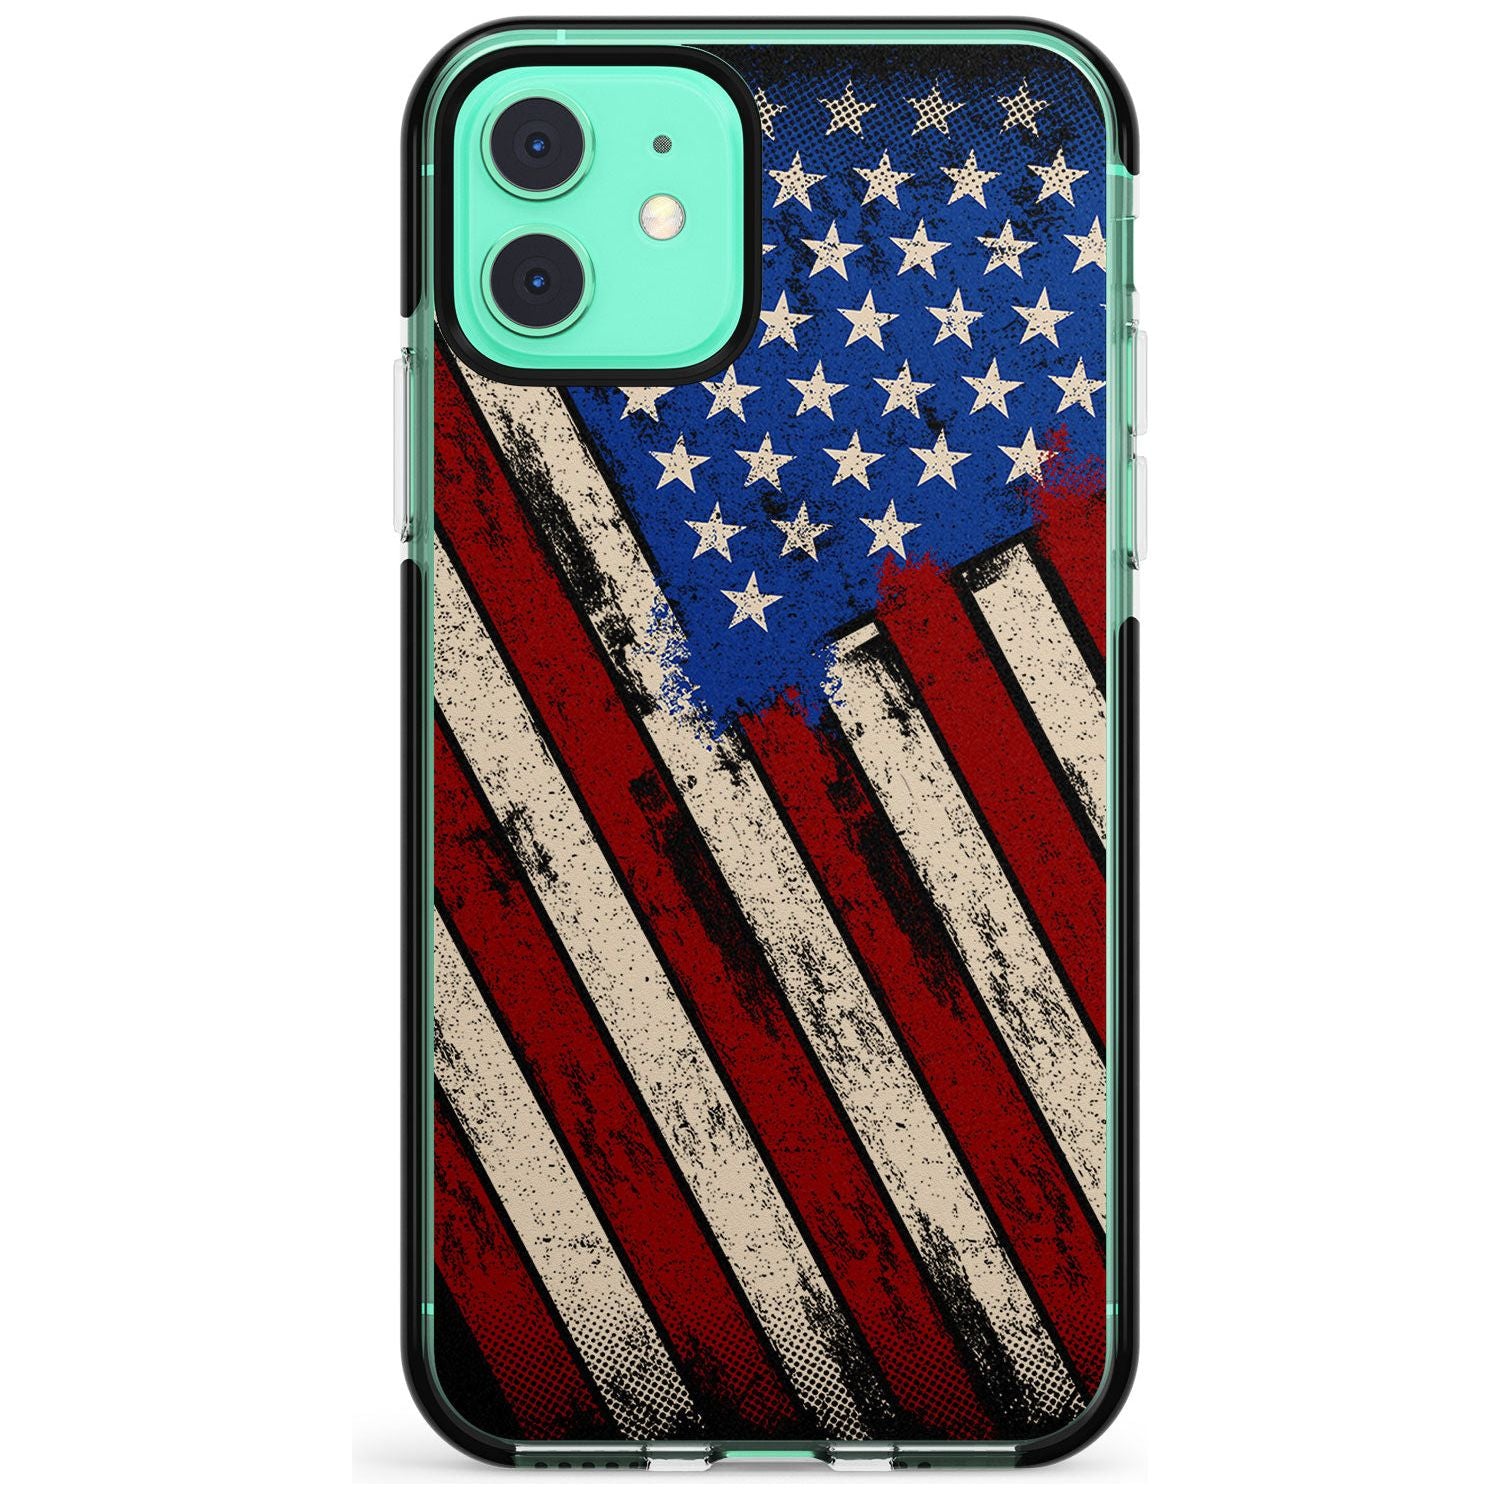 Distressed US Flag Black Impact Phone Case for iPhone 11 Pro Max